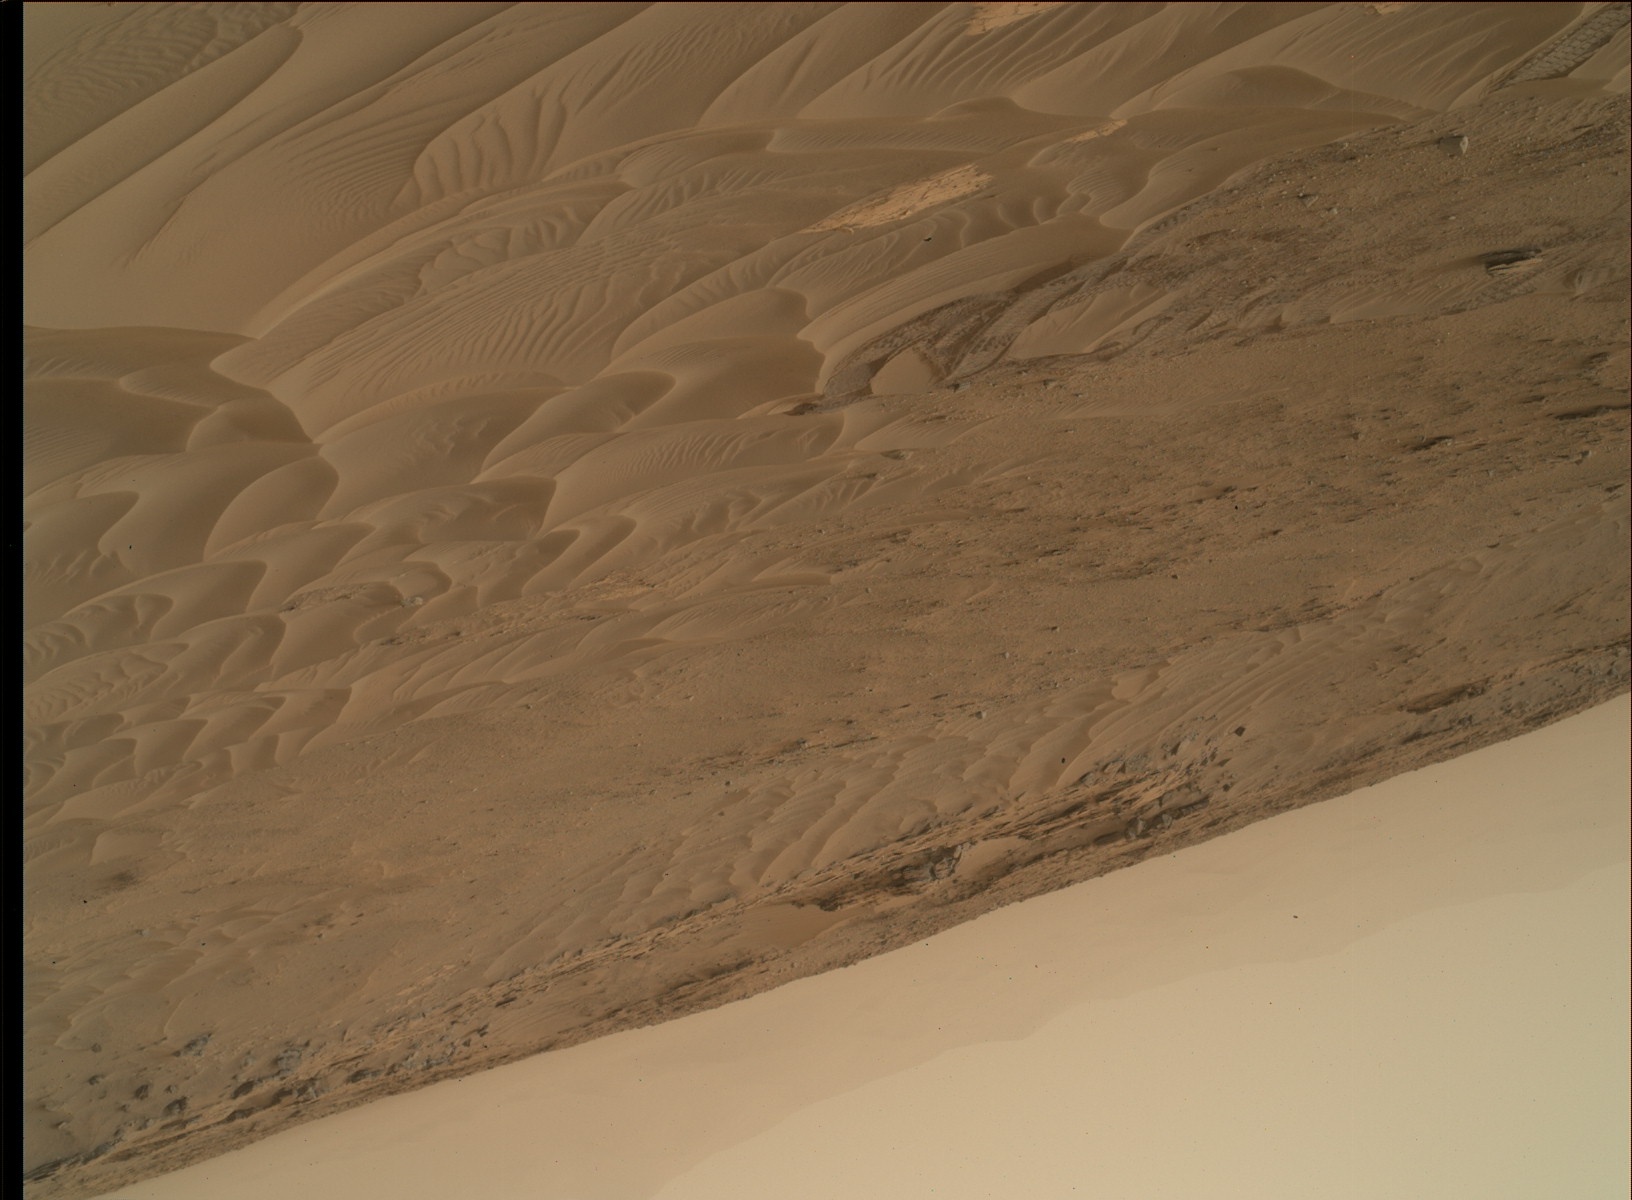 Nasa's Mars rover Curiosity acquired this image using its Mars Hand Lens Imager (MAHLI) on Sol 812